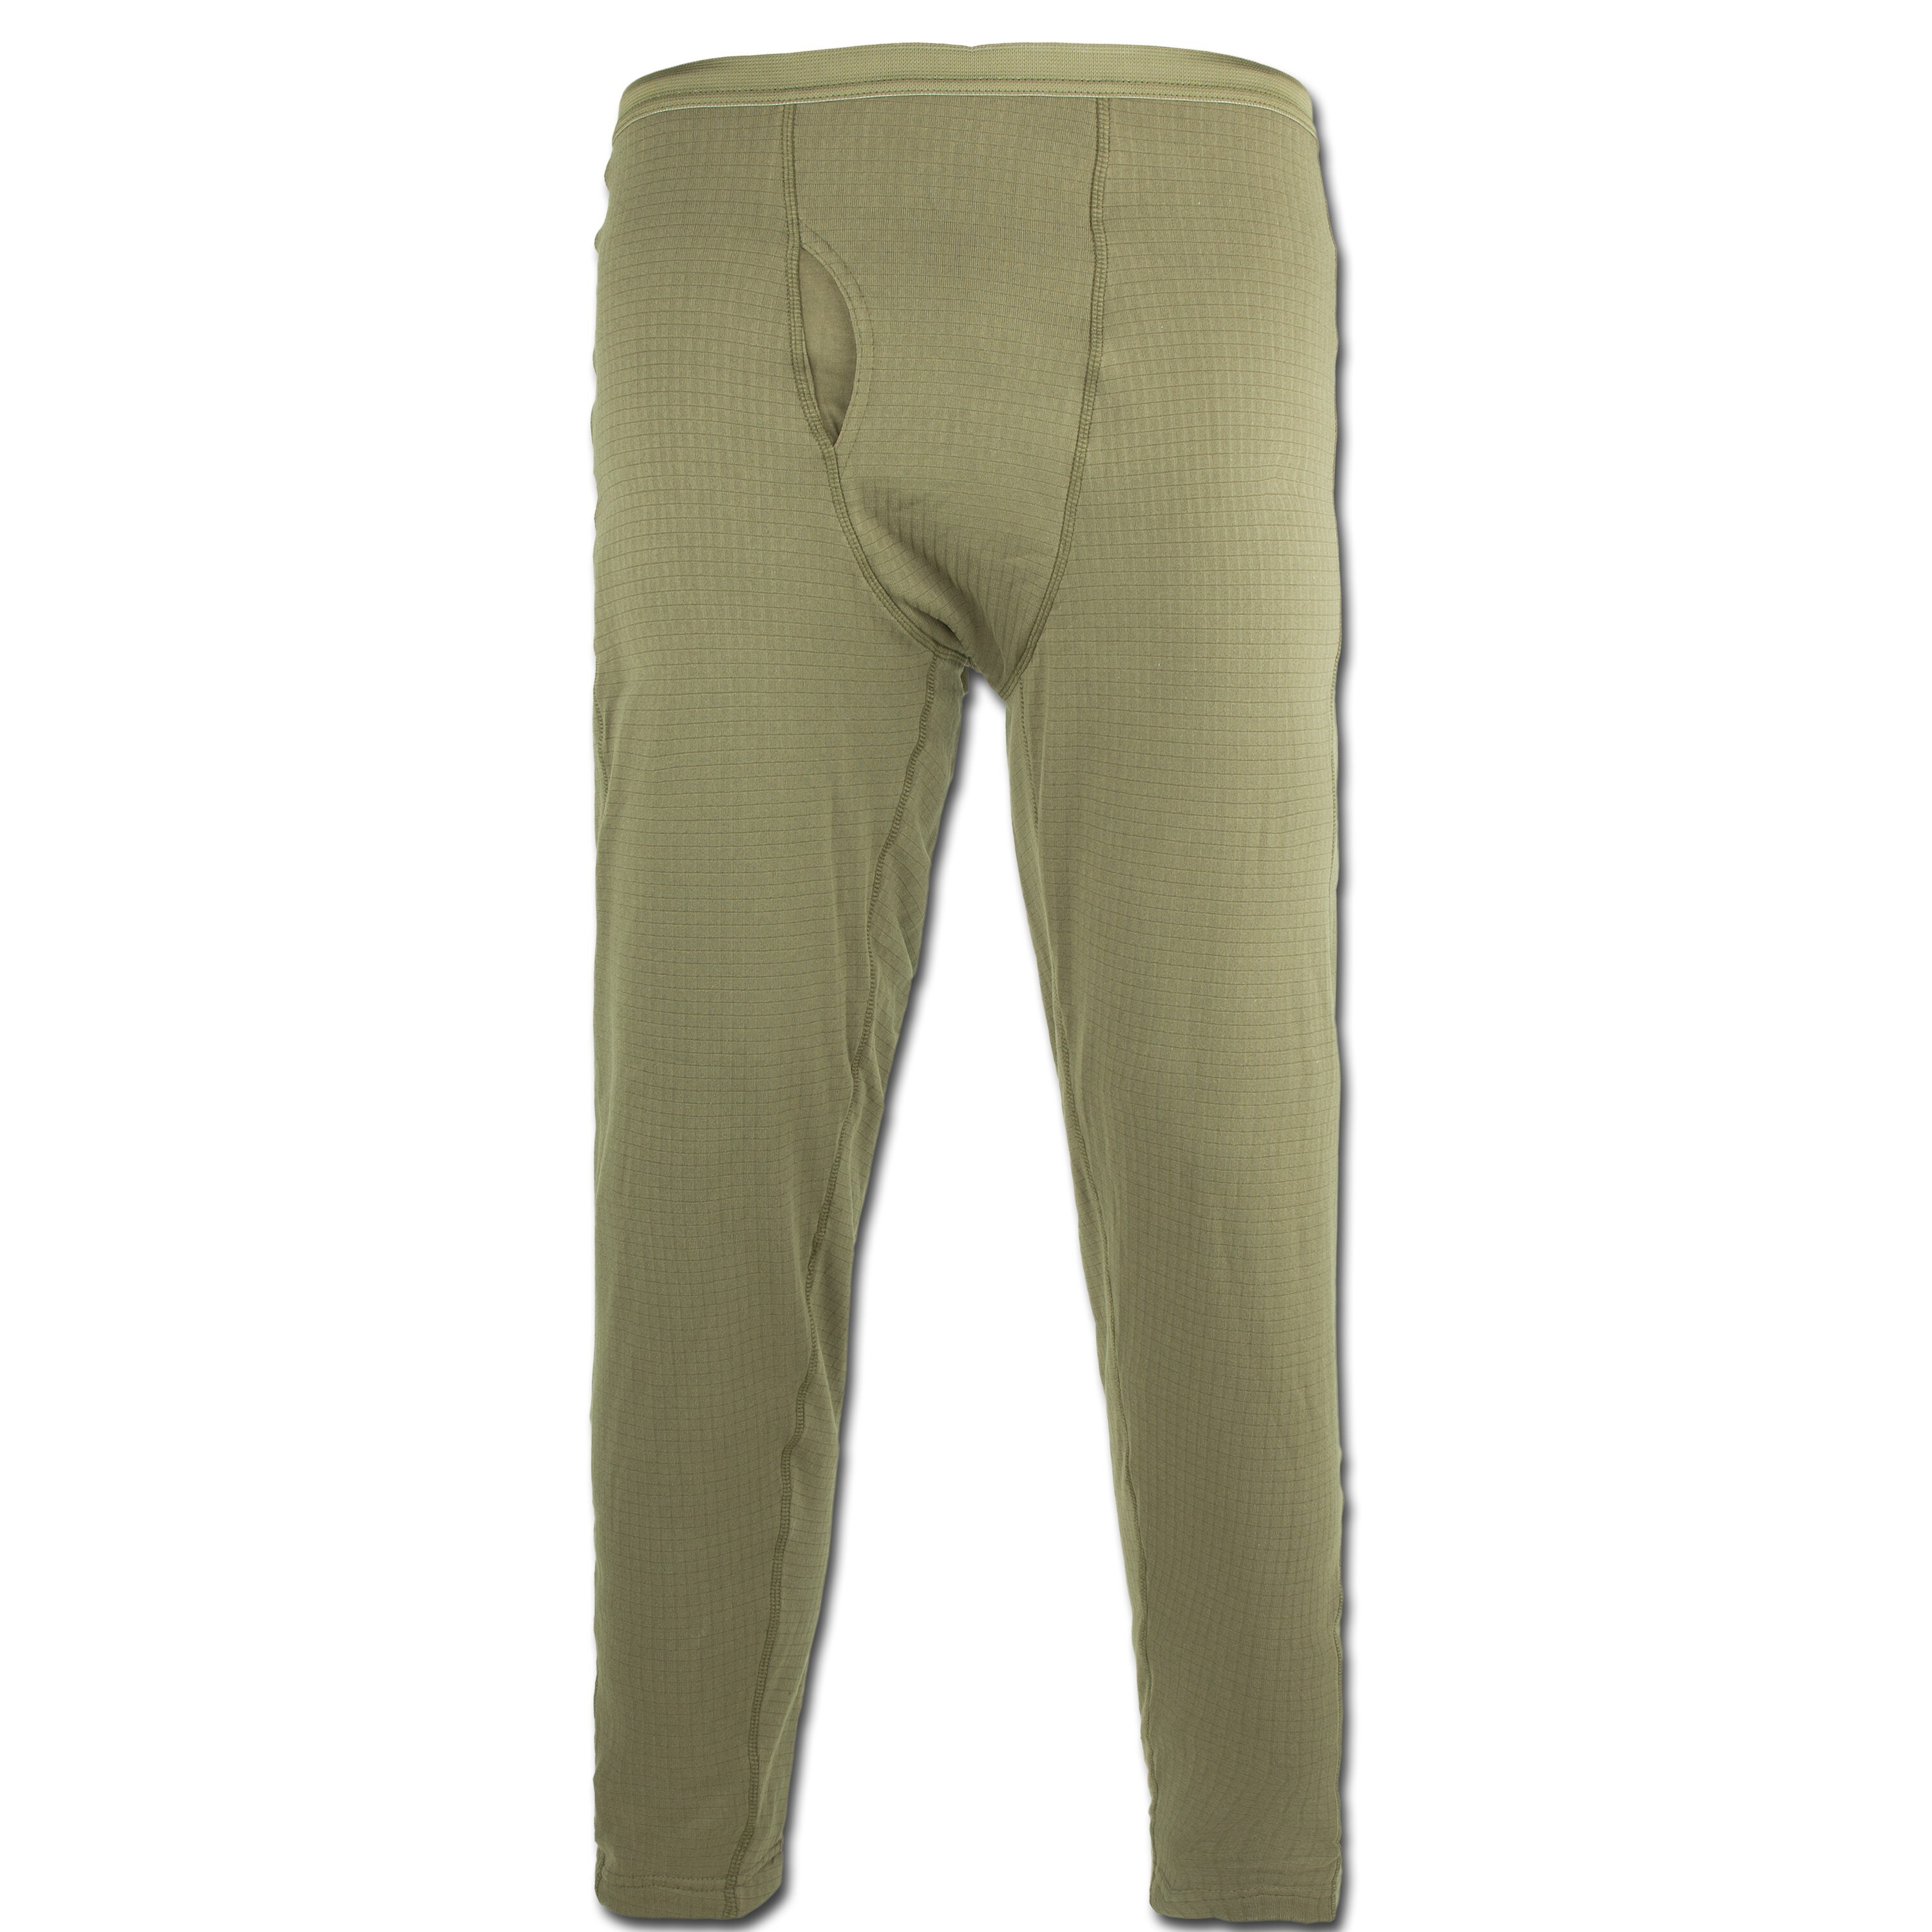 Purchase the Long Johns GEN III ECWCS Level-2 Import olive by AS